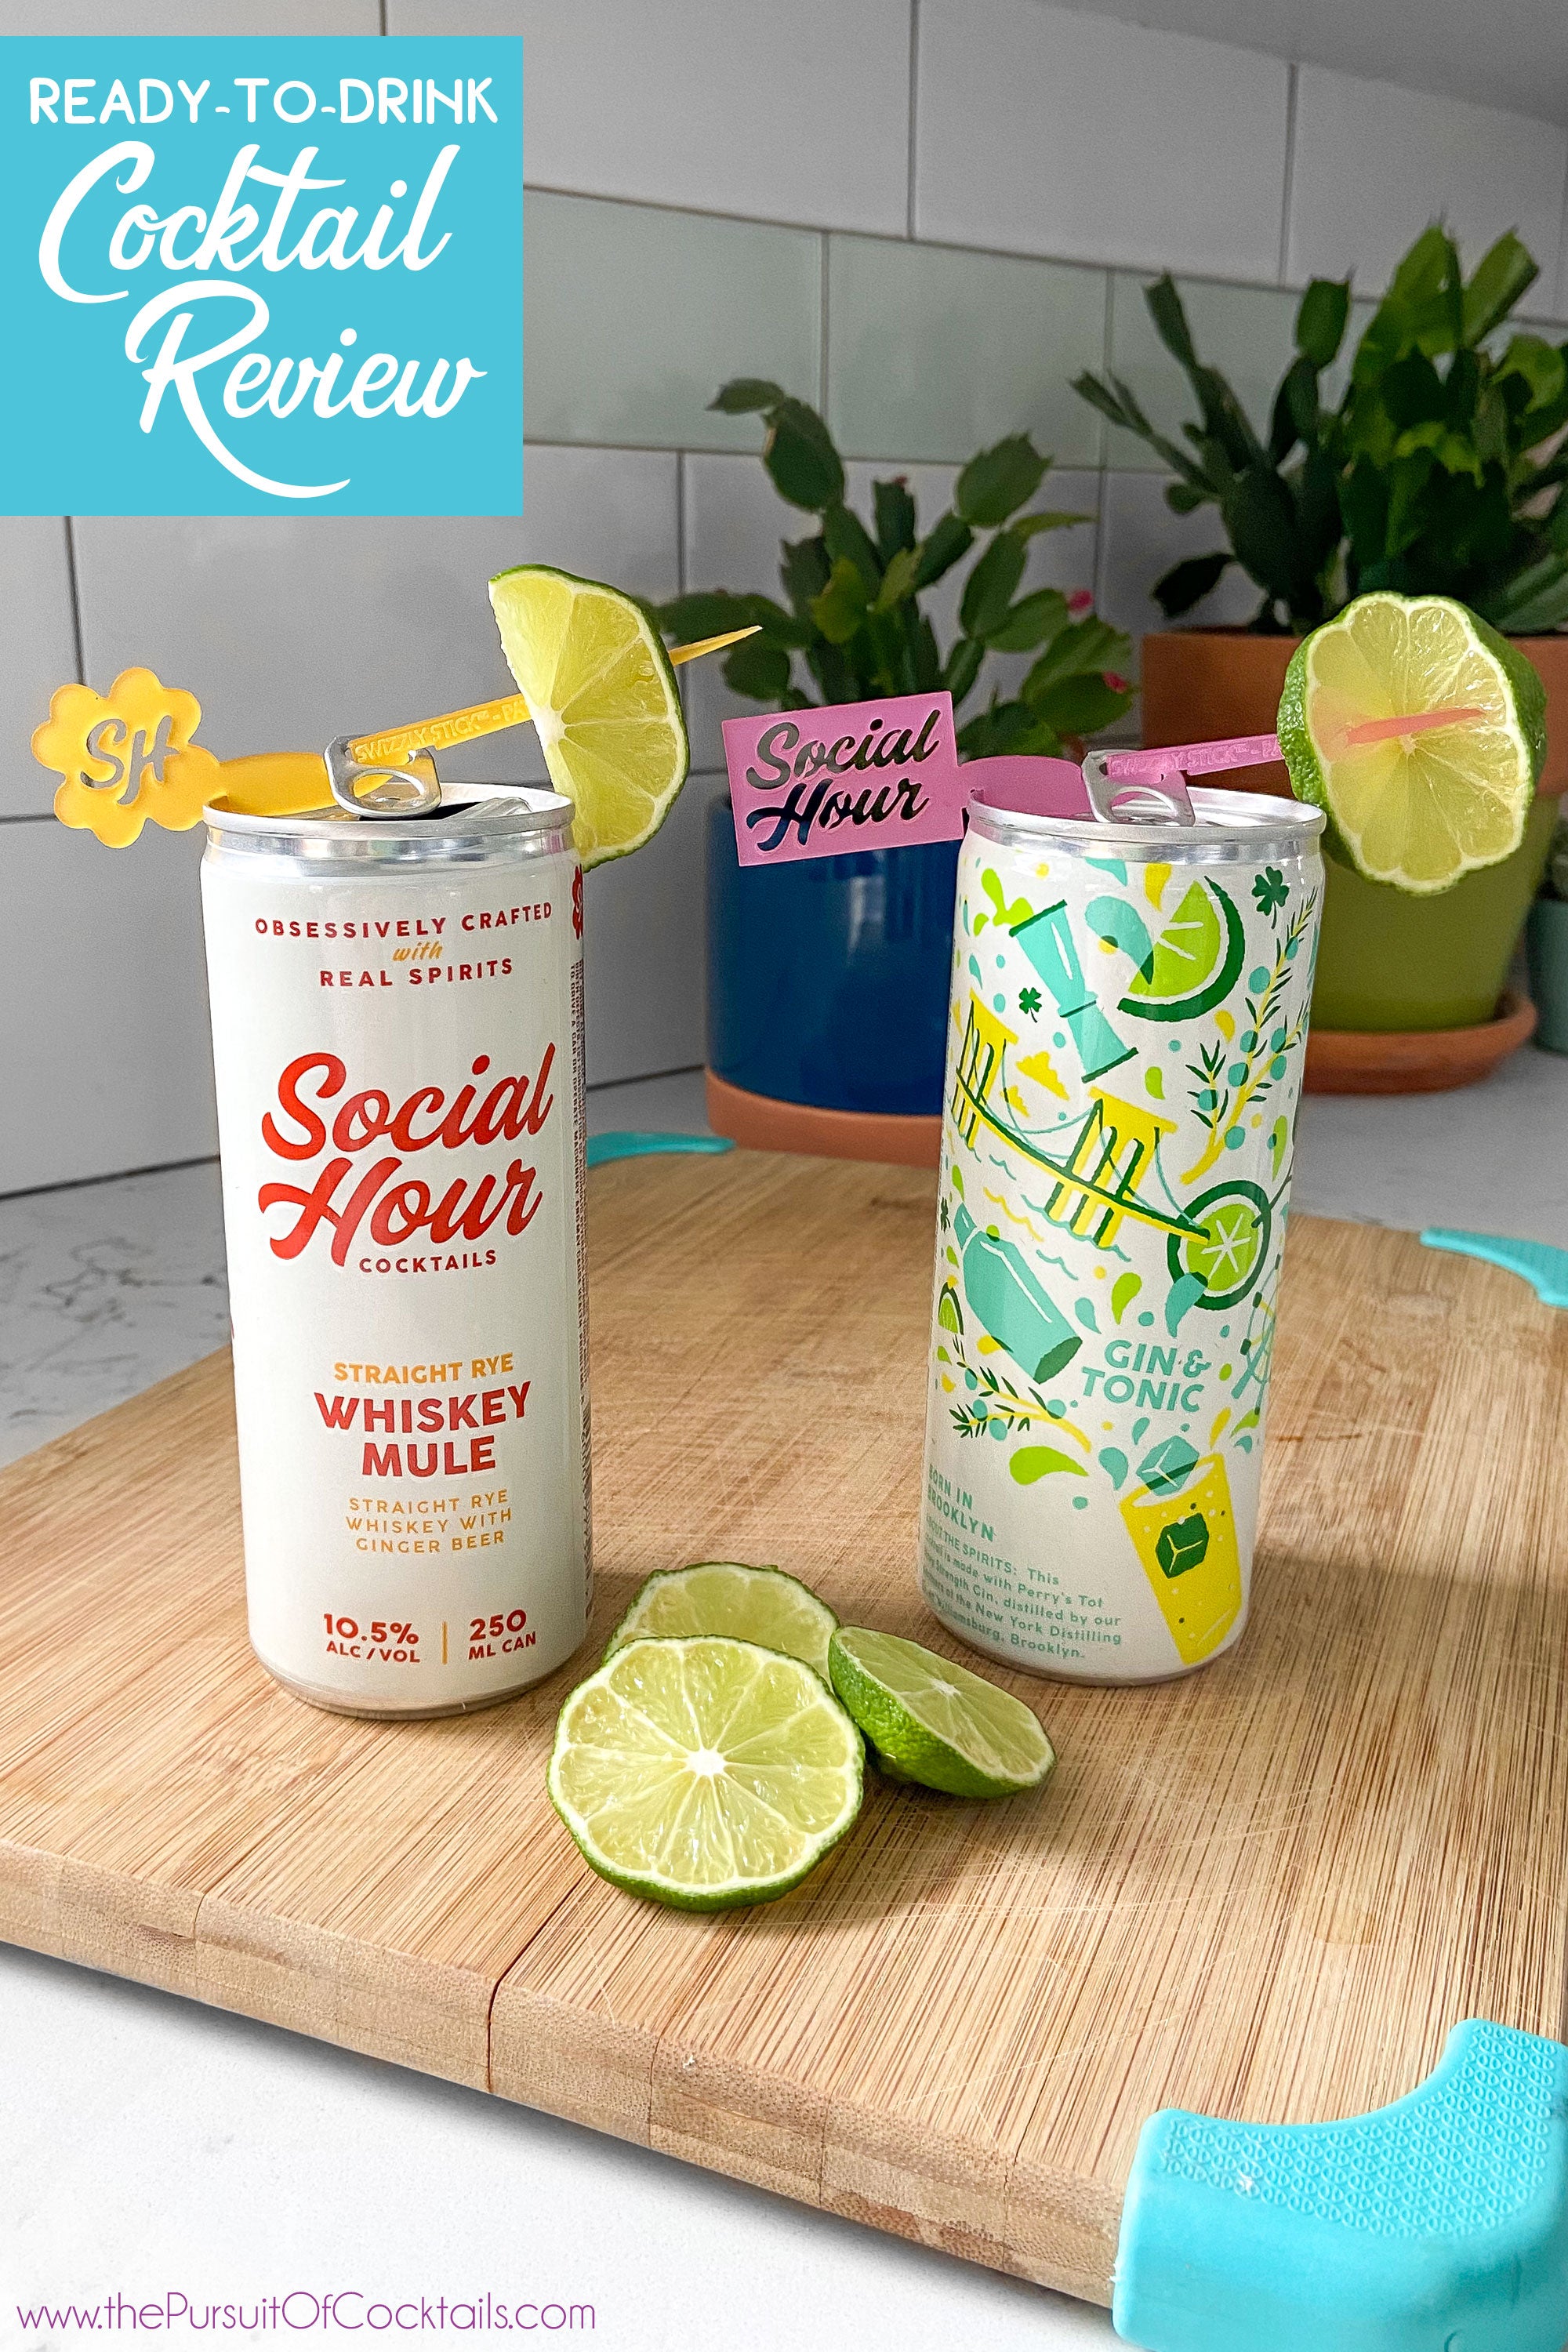 Social Hour canned cocktails reviewed by The Pursuit of Cocktails